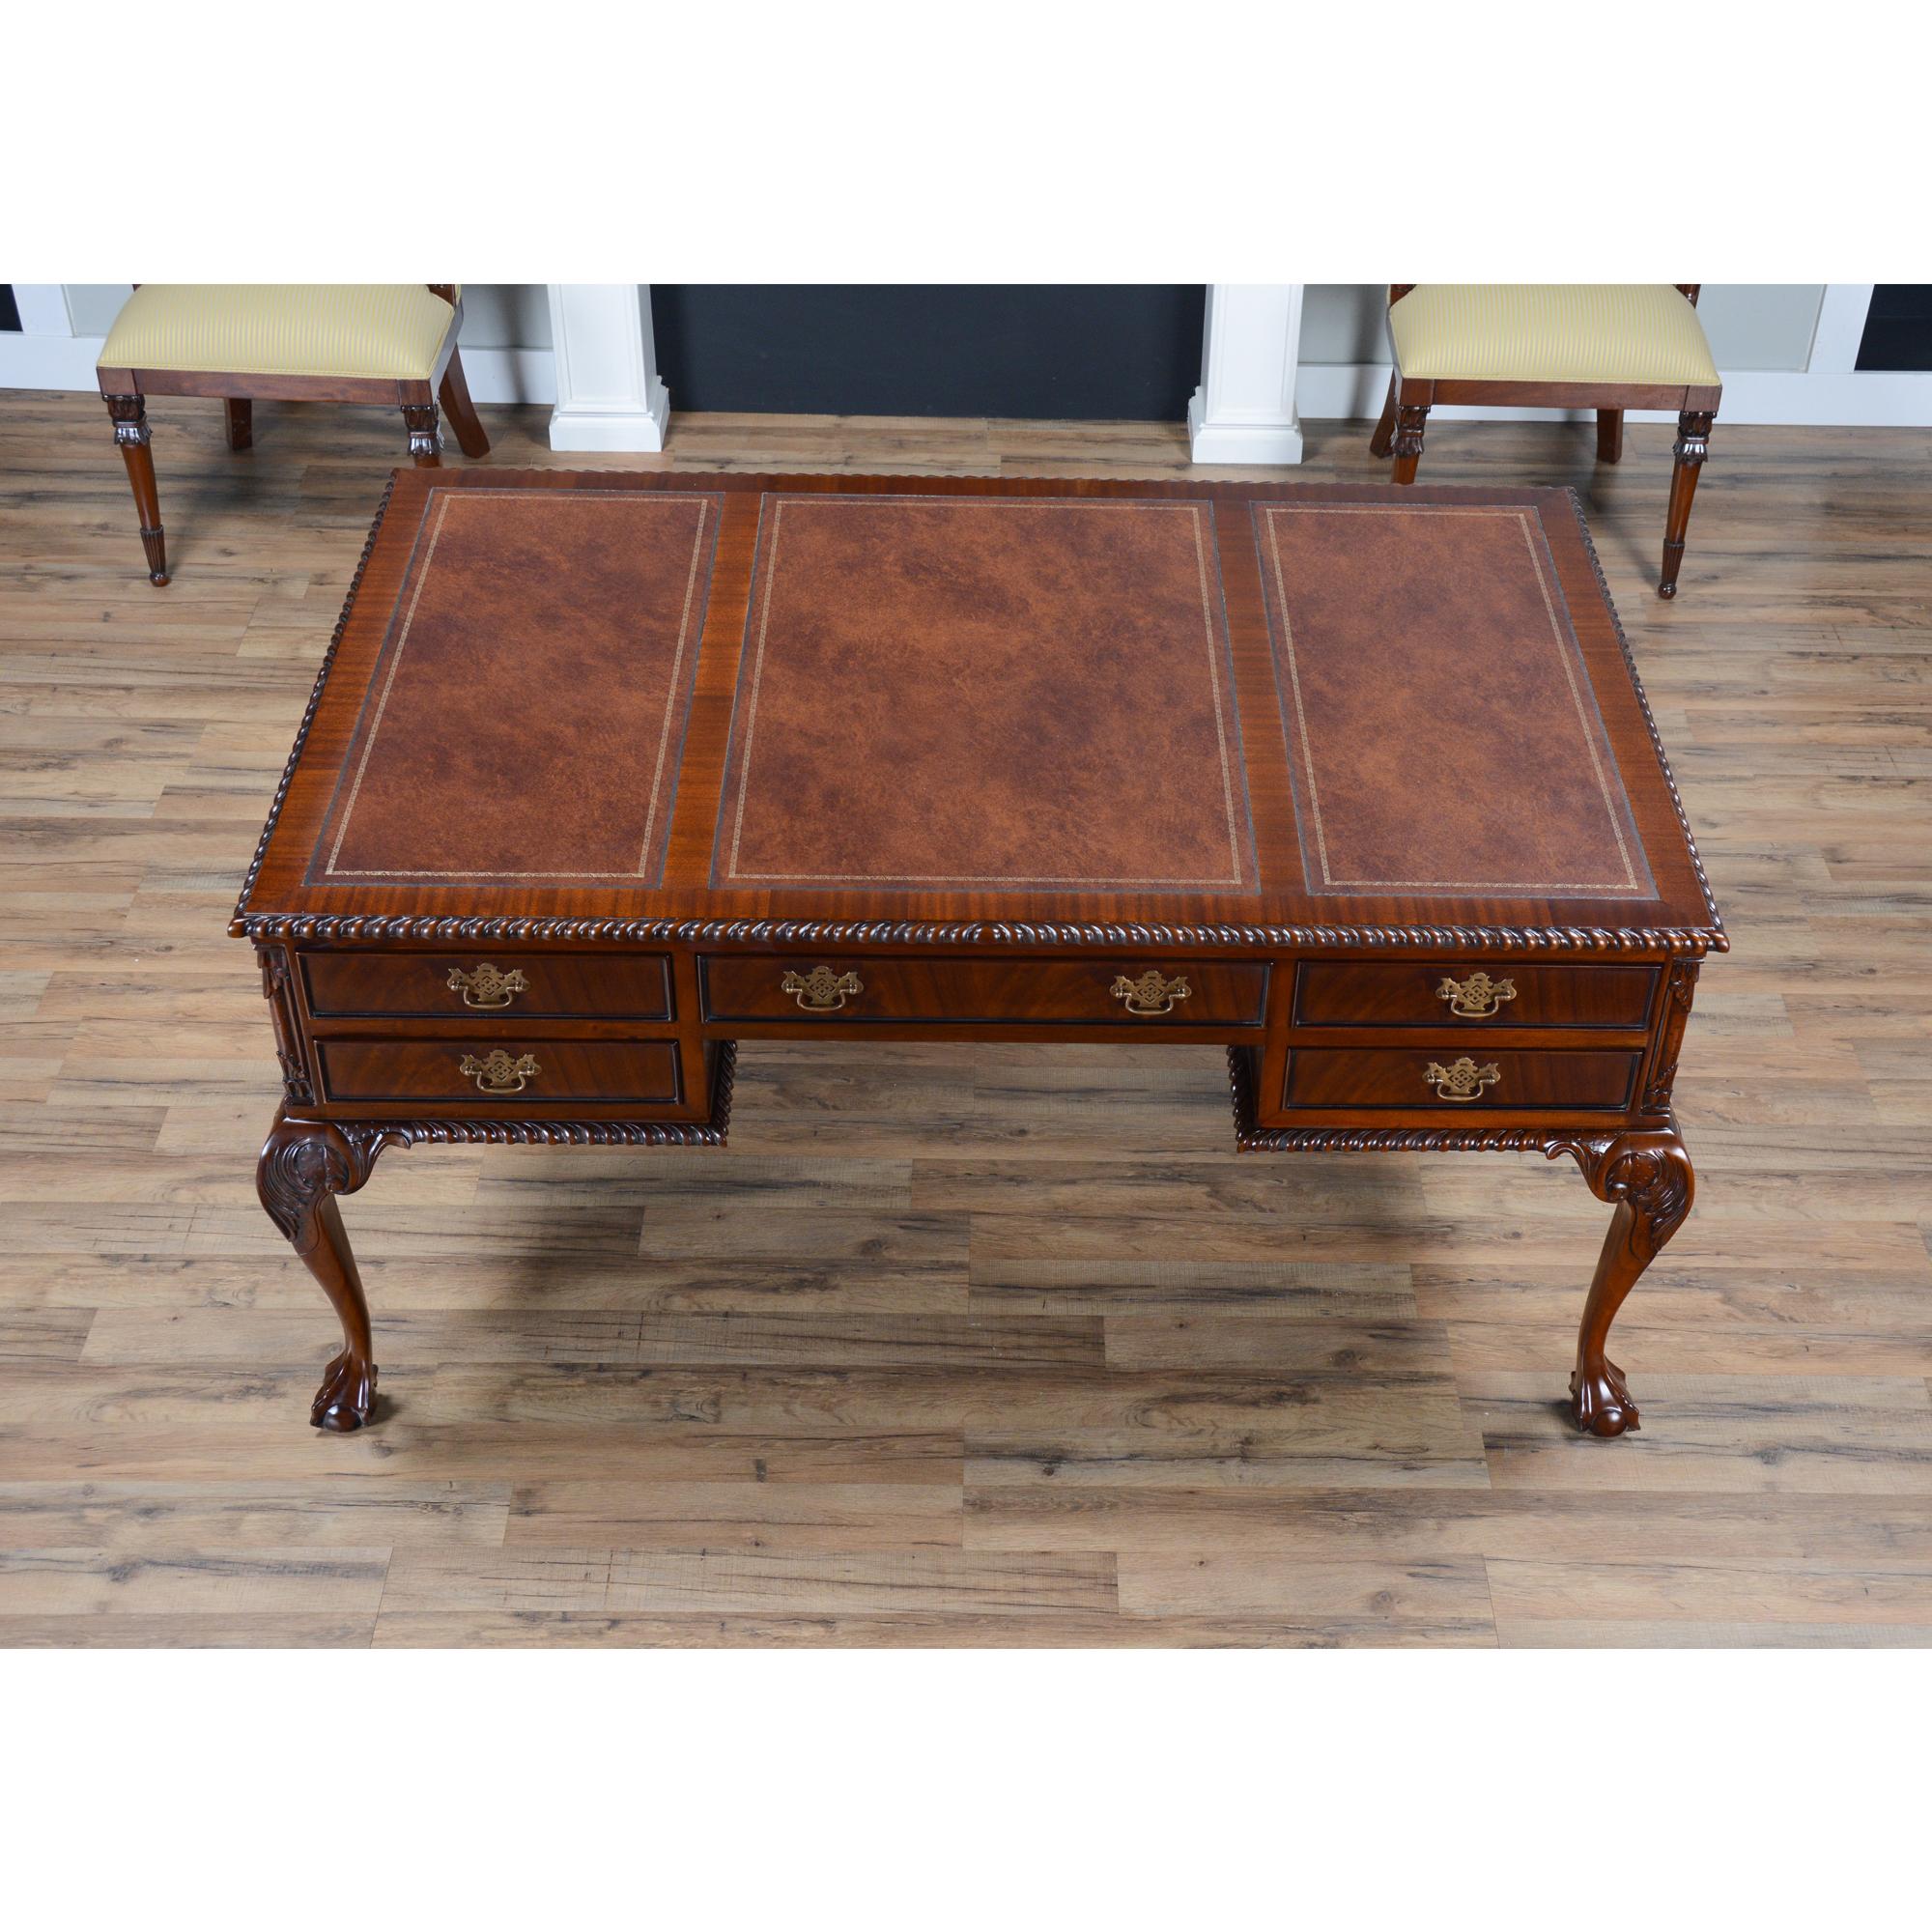 This is the Niagara Furniture version of the Leather Top Partner Desk. It is a true partner’s desk in every sense of the phrase with an equal number of drawers on each side of the desk. This Chippendale style high quality writing desk sets the